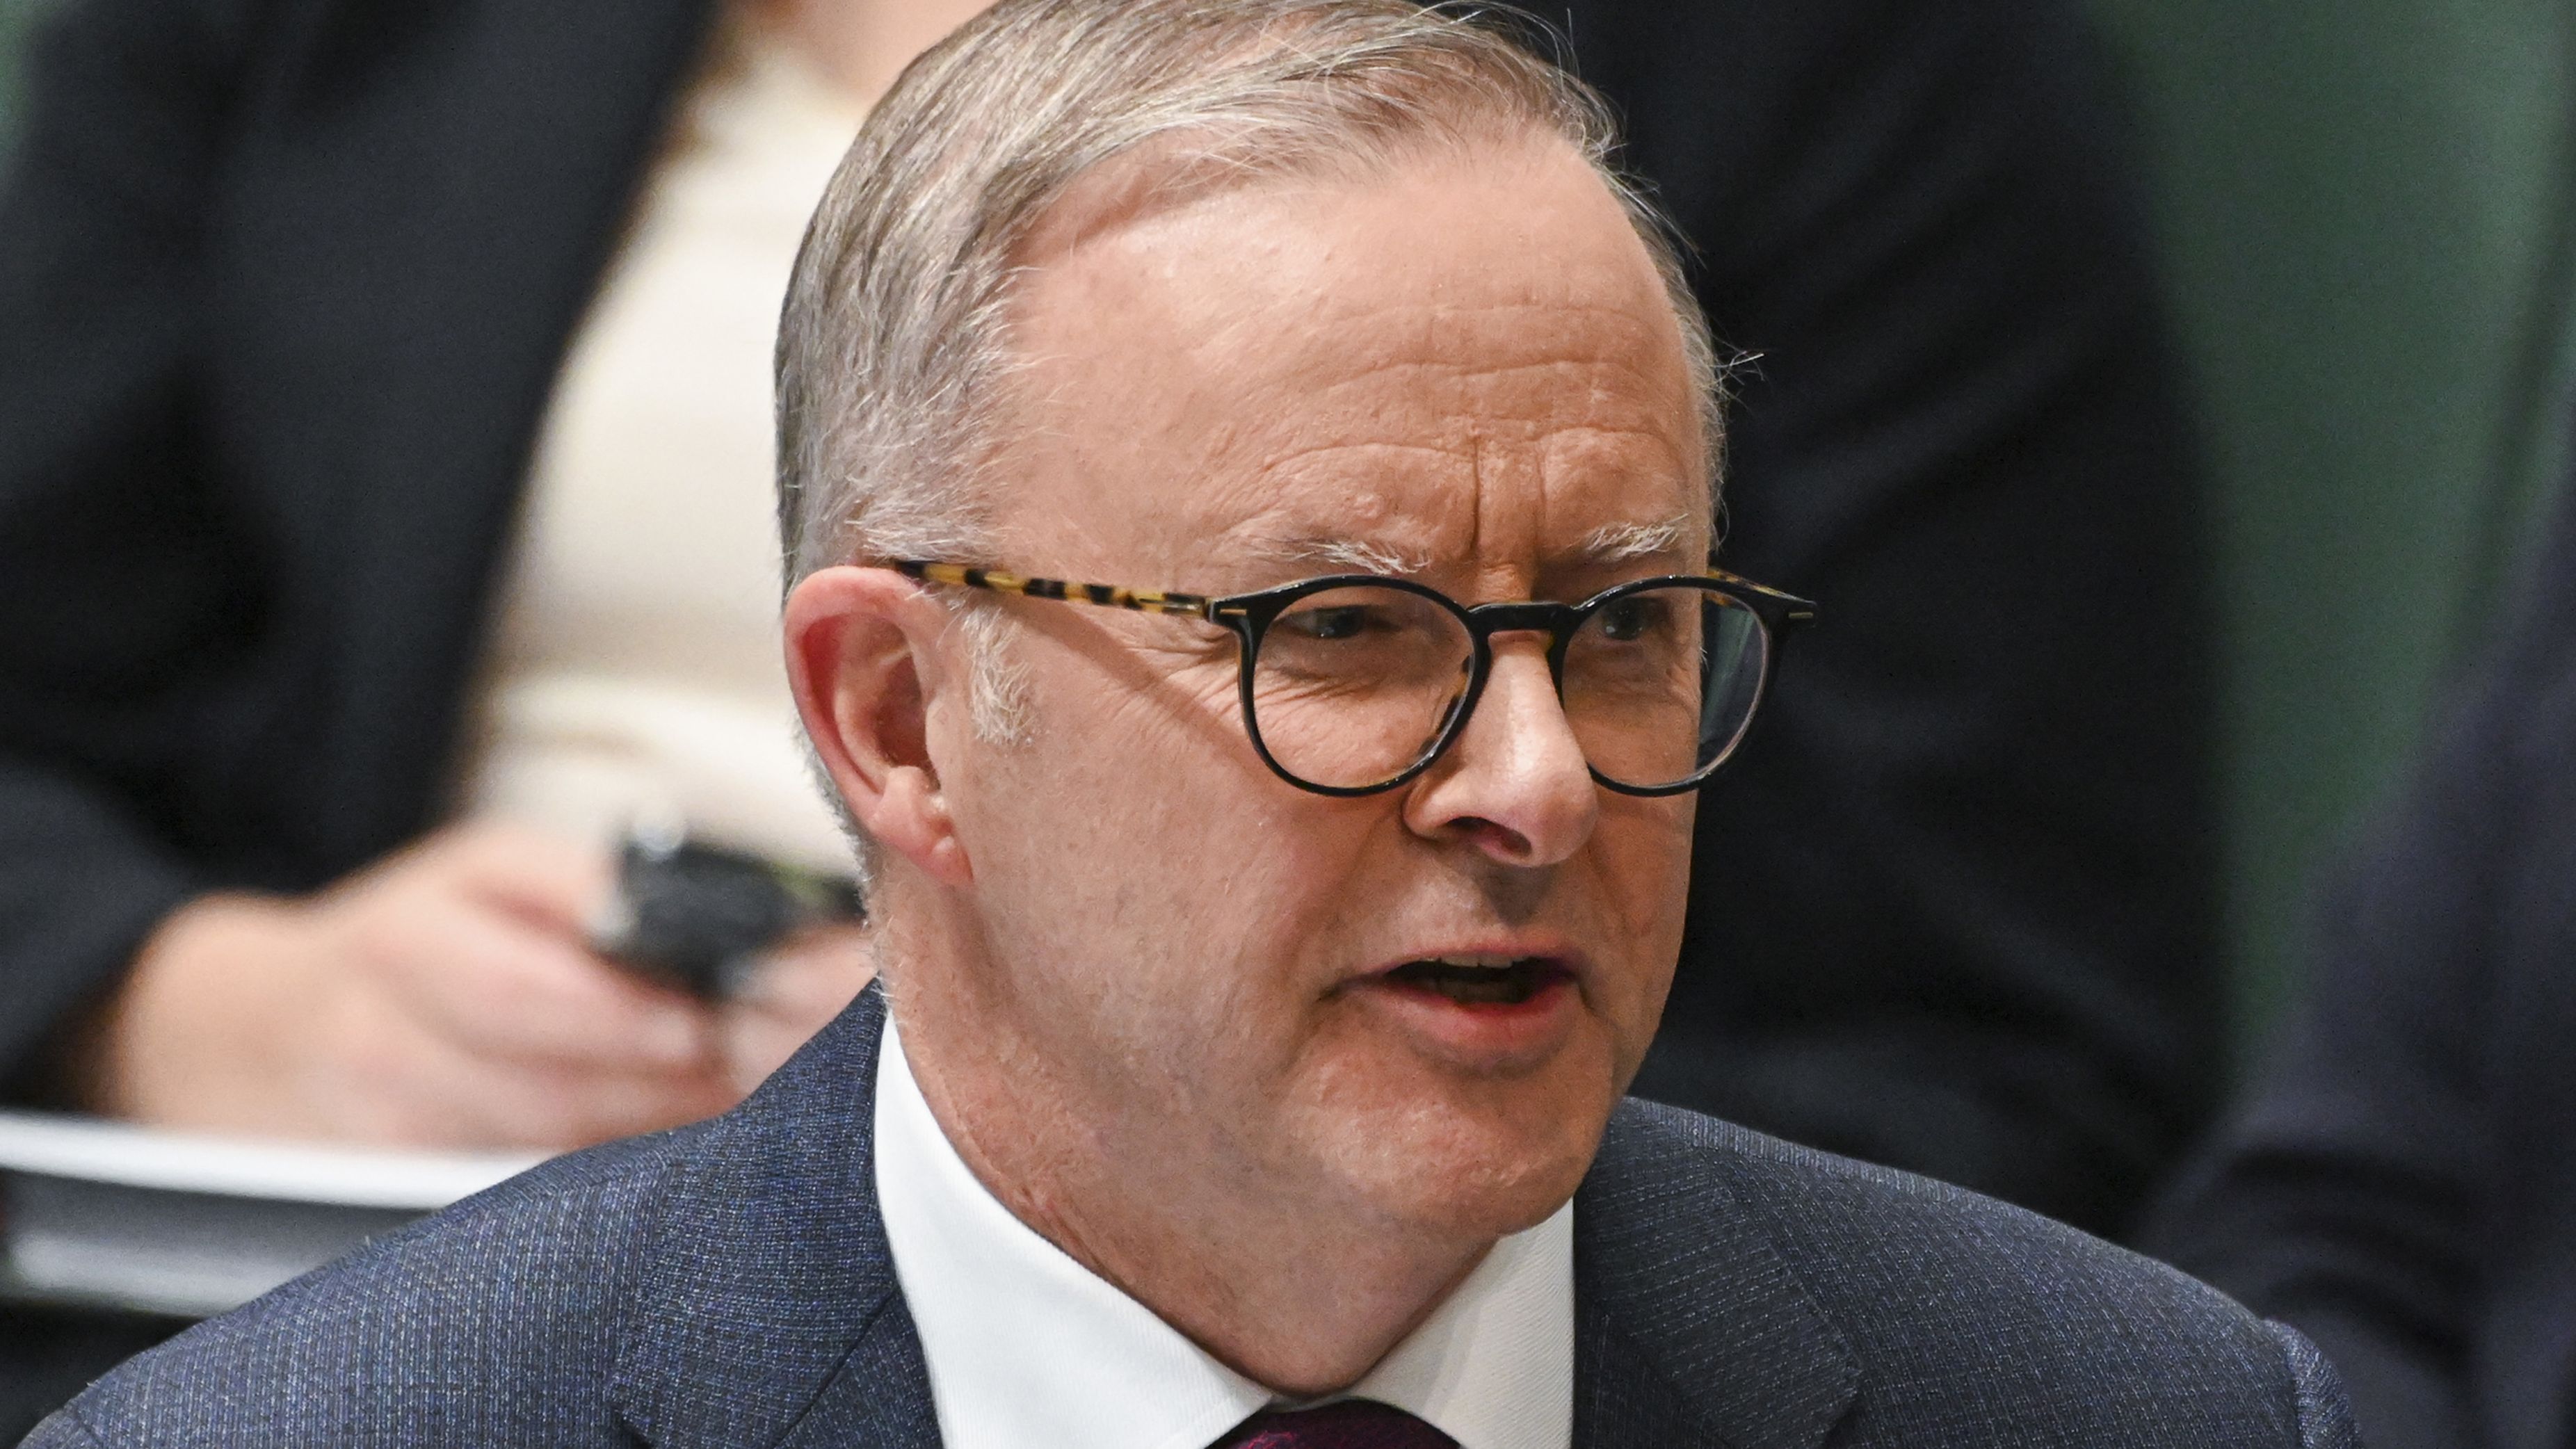 CANBERRA, AUSTRALIA - MARCH 30: Australian Prime Minister Anthony Albanese reacts during Question Time at Parliament House on March 30, 2023 in Canberra, Australia. (Photo by Martin Ollman/Getty Images)